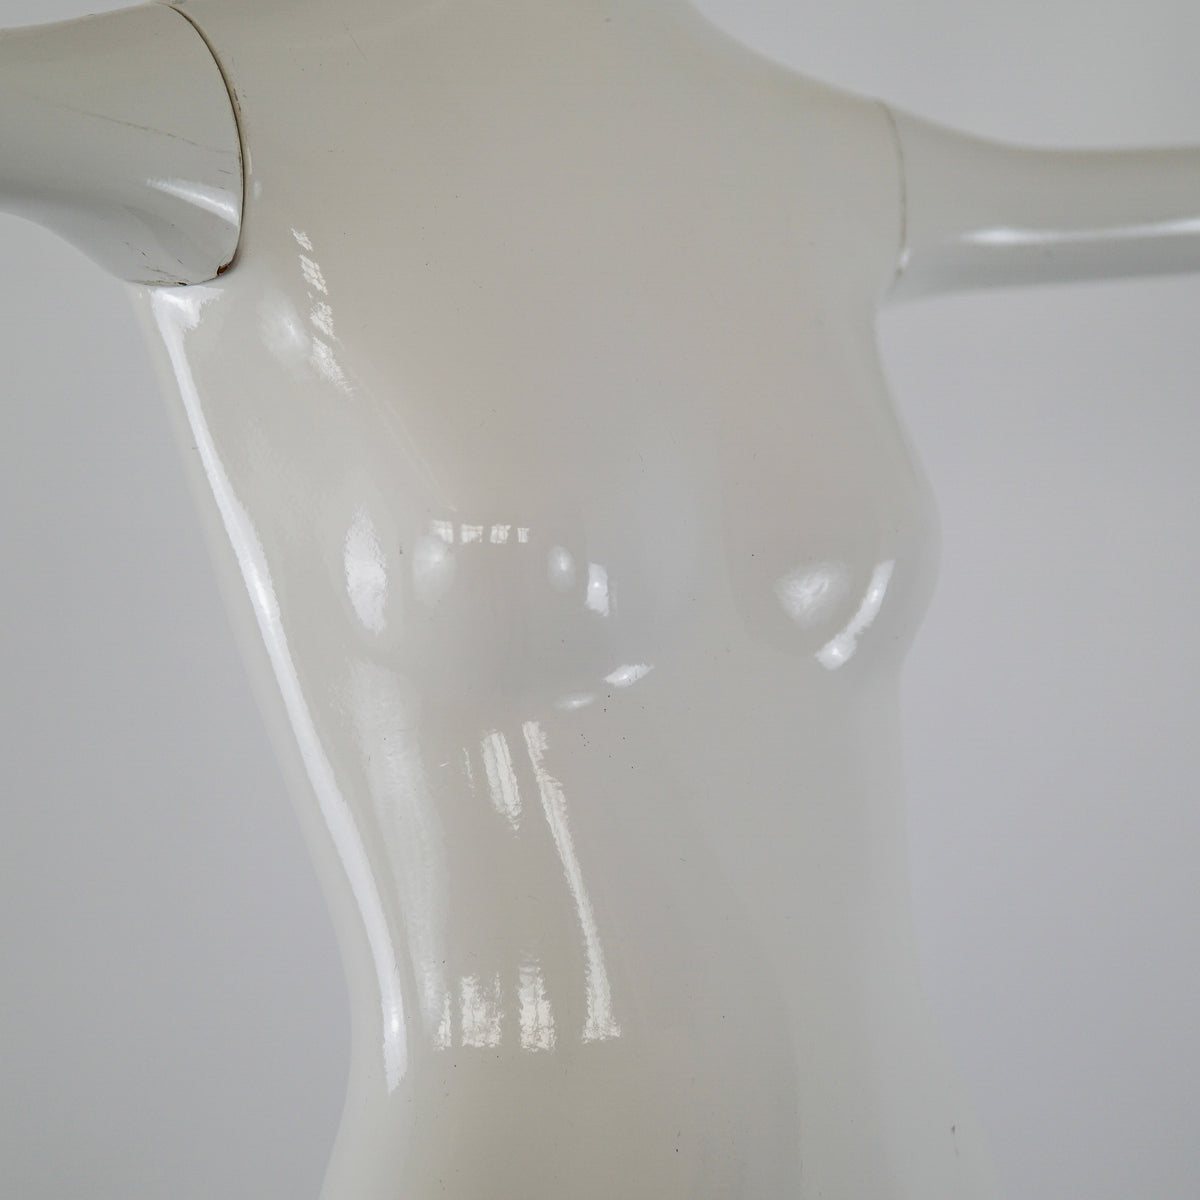 Vintage Poliester White Standing Mannequin Open Arms